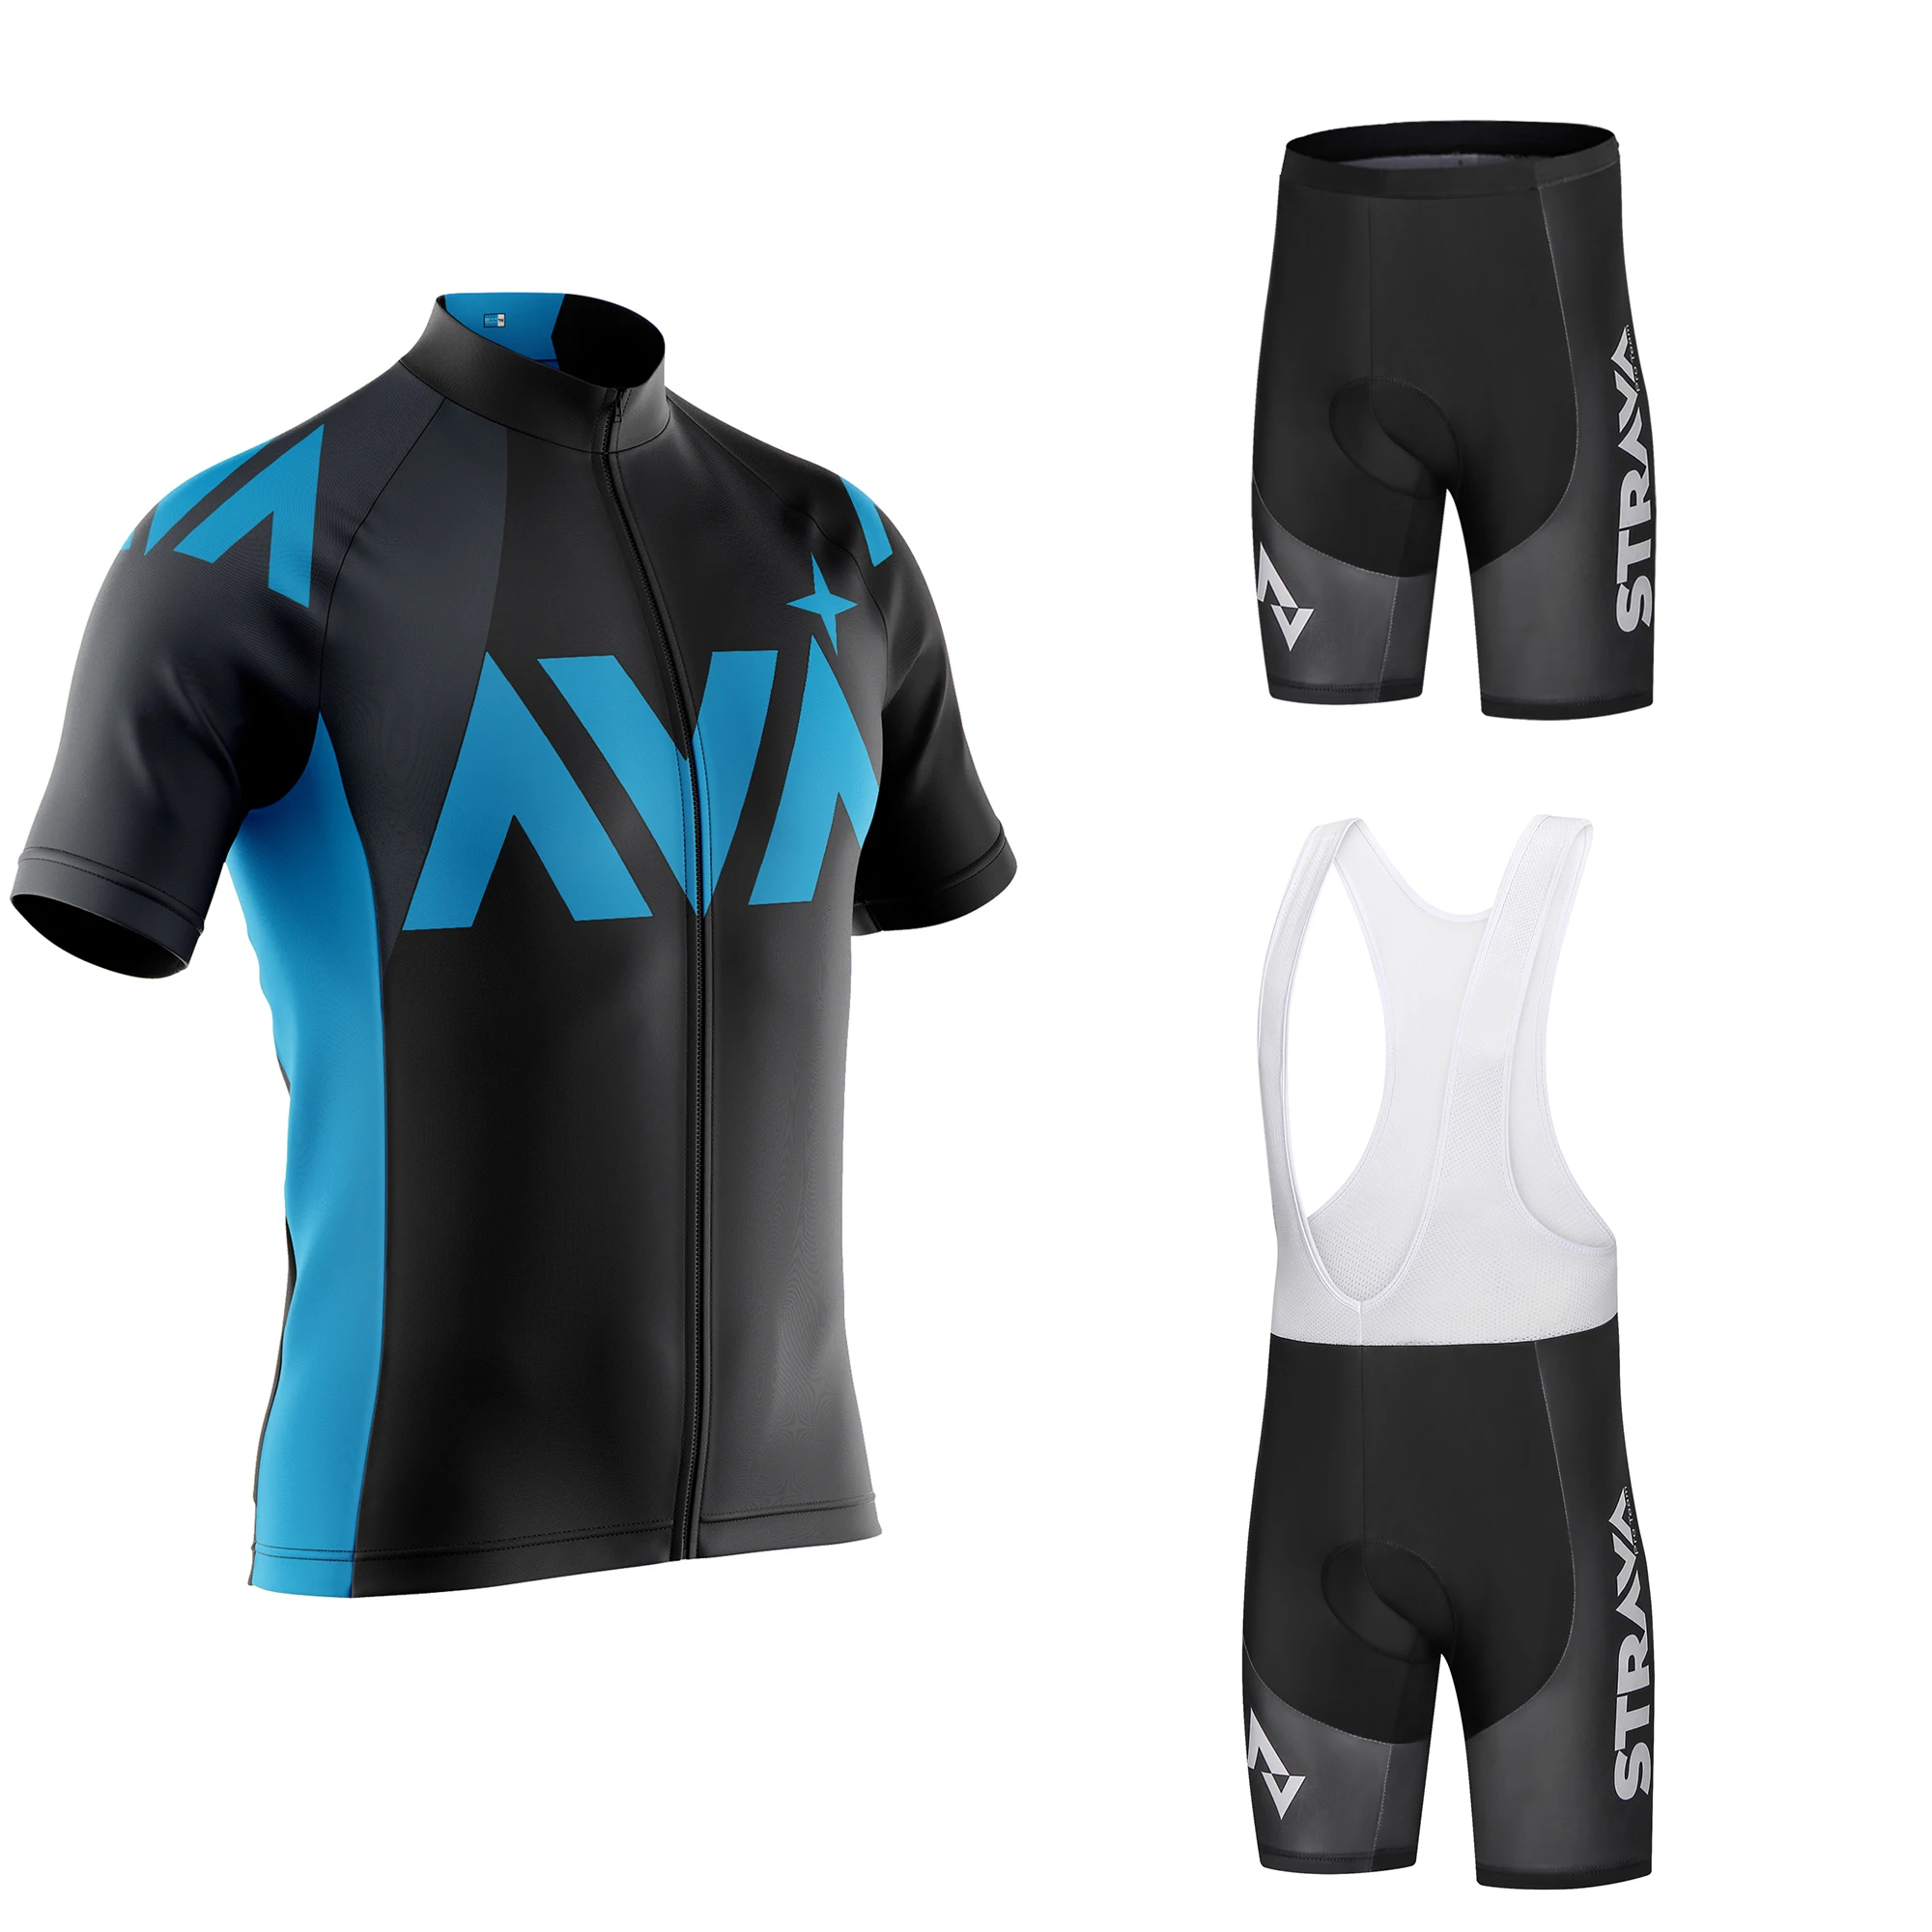 2021 Mens Team Cycling Jersey And Shorts Set Summer Short Sleeve Bicycle Outfits 